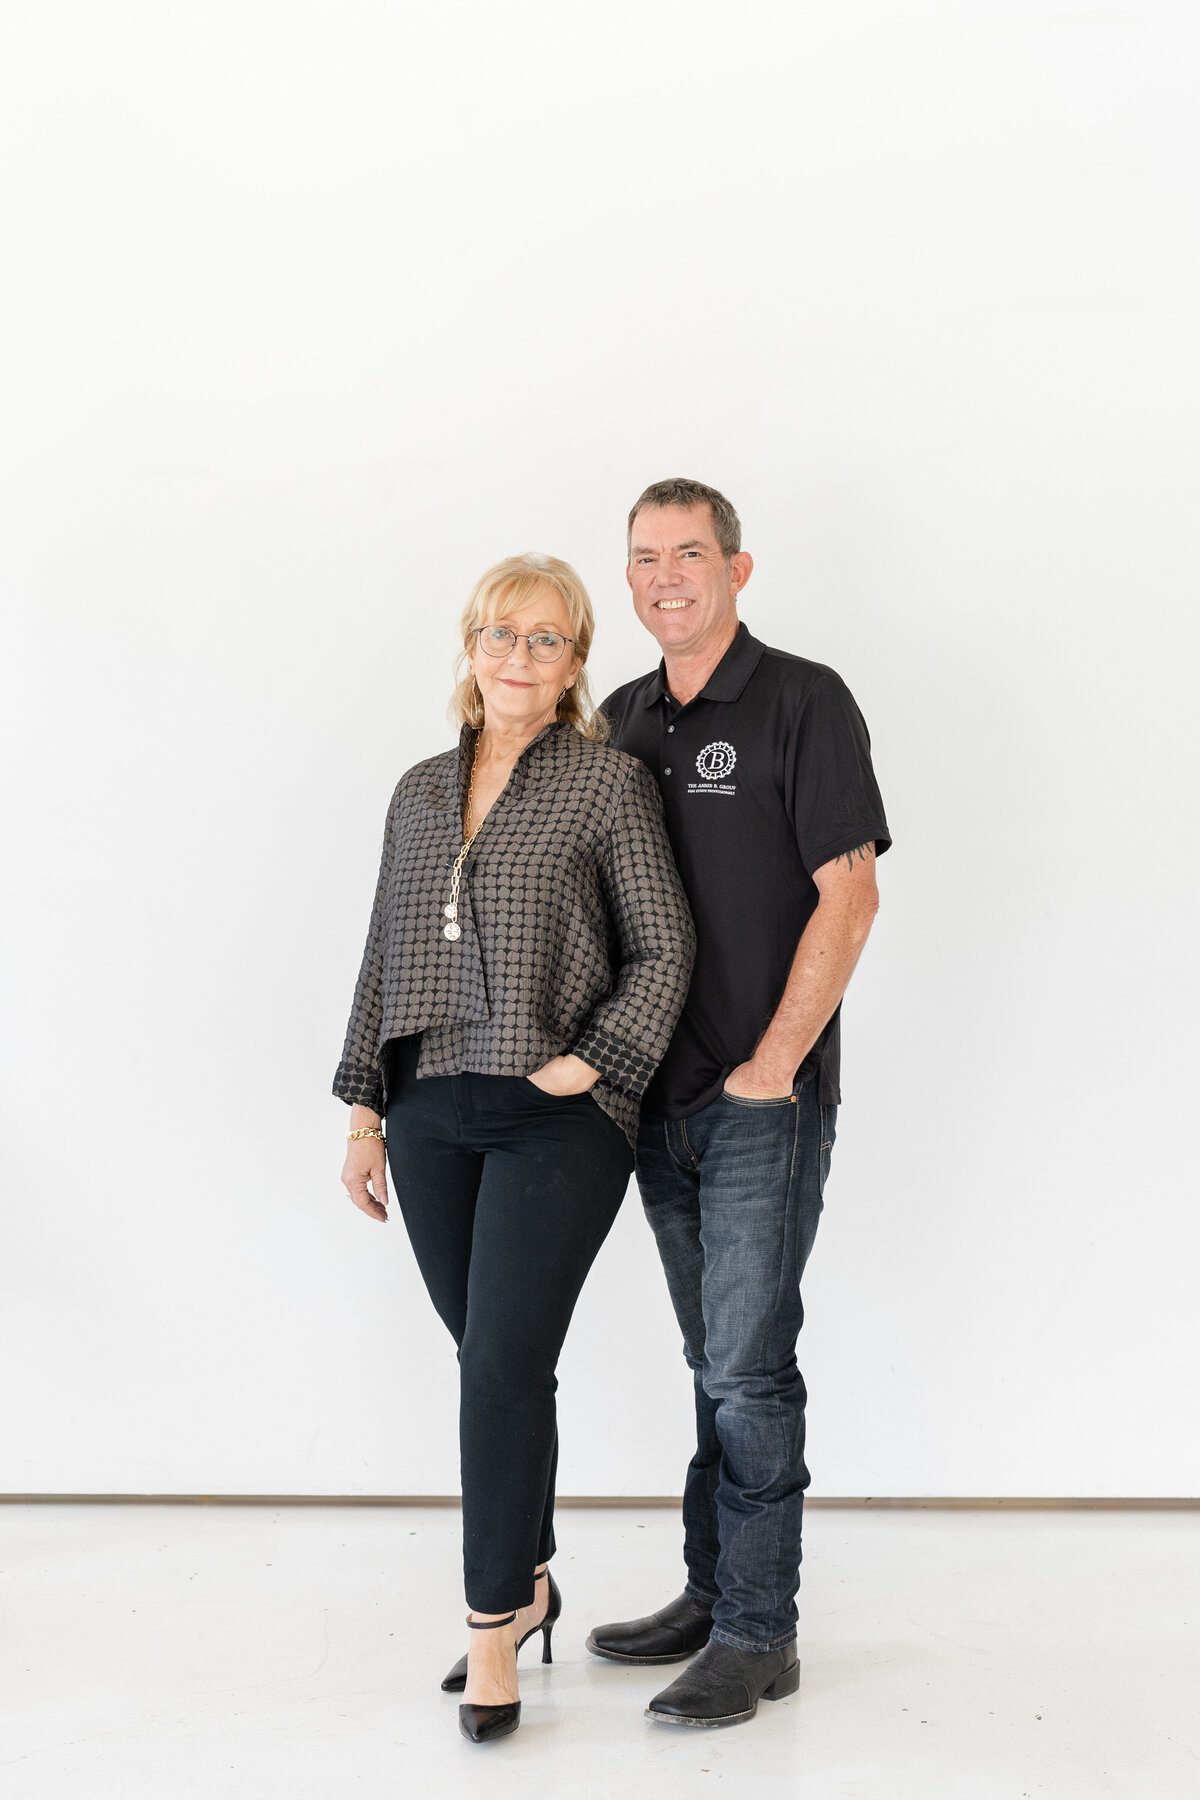 Husband and wife standing in front of white backdrop for real estate branding session at Sweenshots Studio in Houston